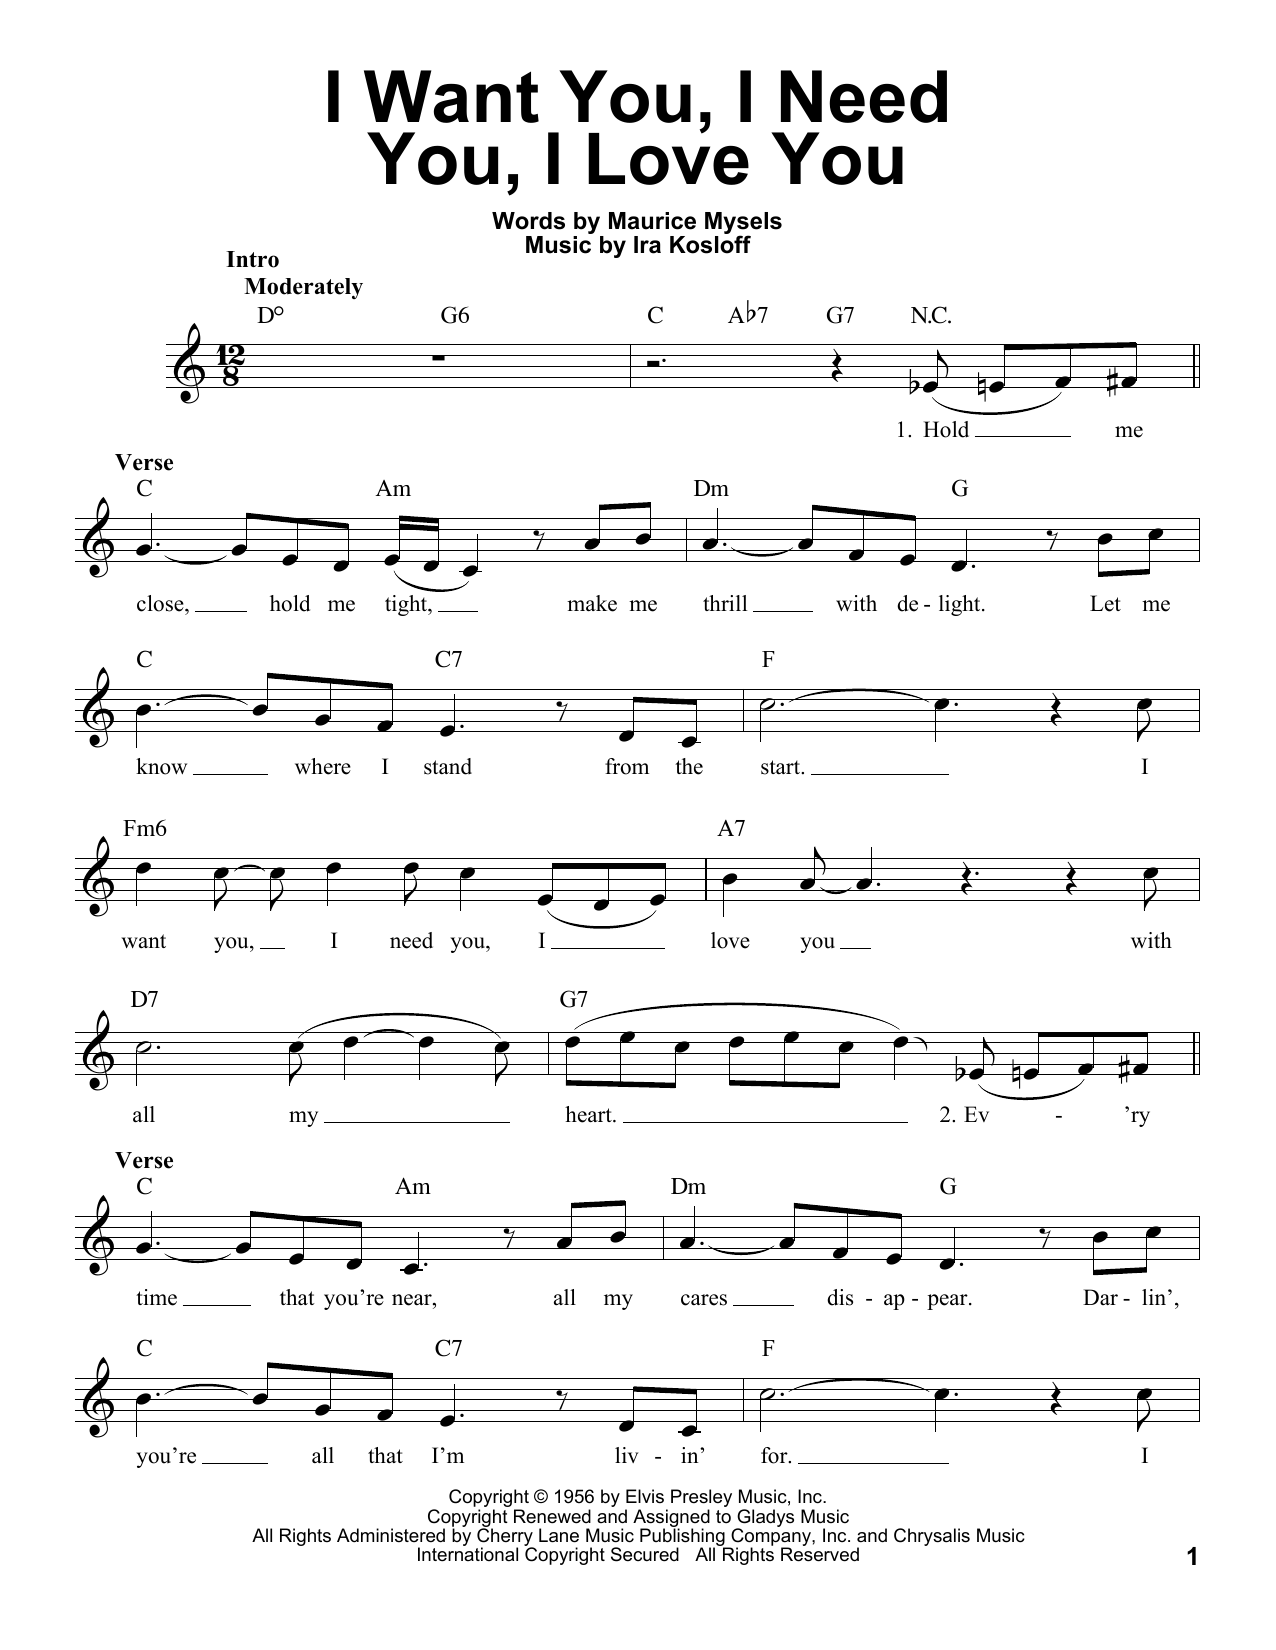 Download Elvis Presley I Want You, I Need You, I Love You Sheet Music